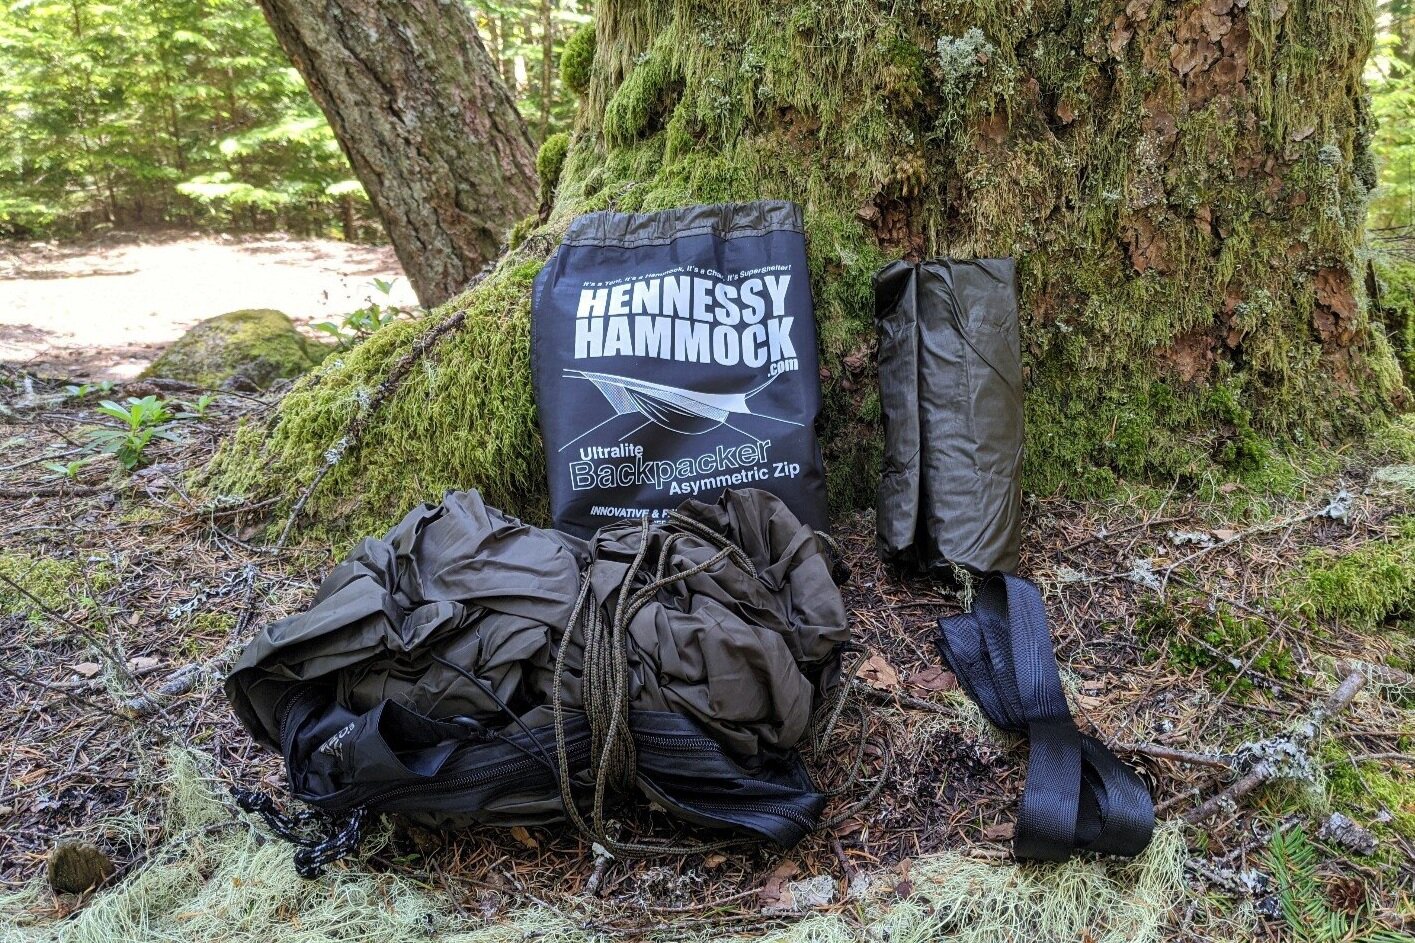 Hennessy Hammock Ultralite Backpacker Series Compact Favorites on The Long Trails 